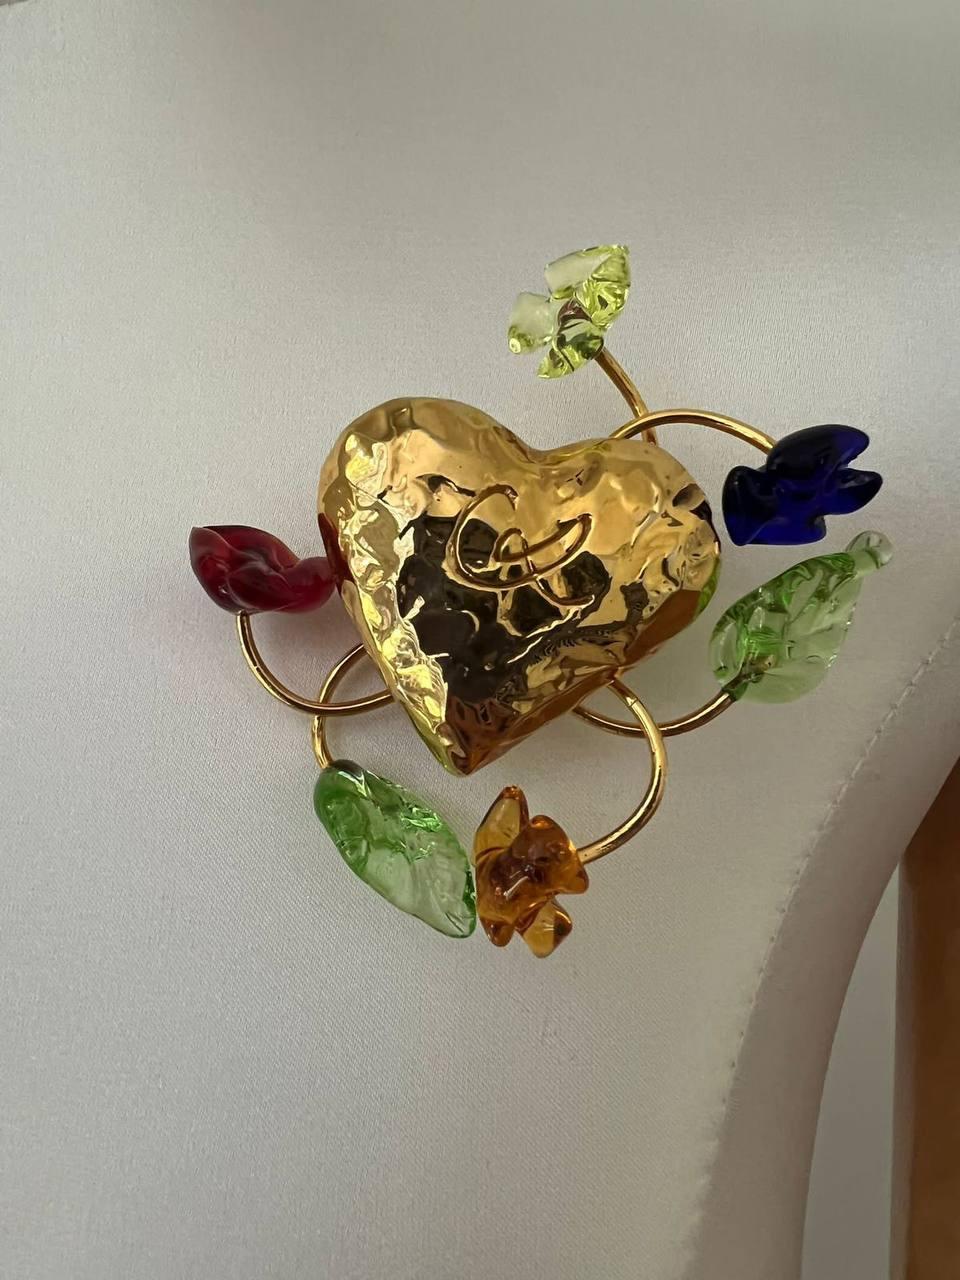 Signature structured gold-tone metal brooch in the form of heart with CL signature by Christian Lacroix. Elevated with blue, red and yellow glass flowers and green petals on metal twigs. 
Signed. 
Period: 1990s
Condition: excellent
Diameter: 7cm